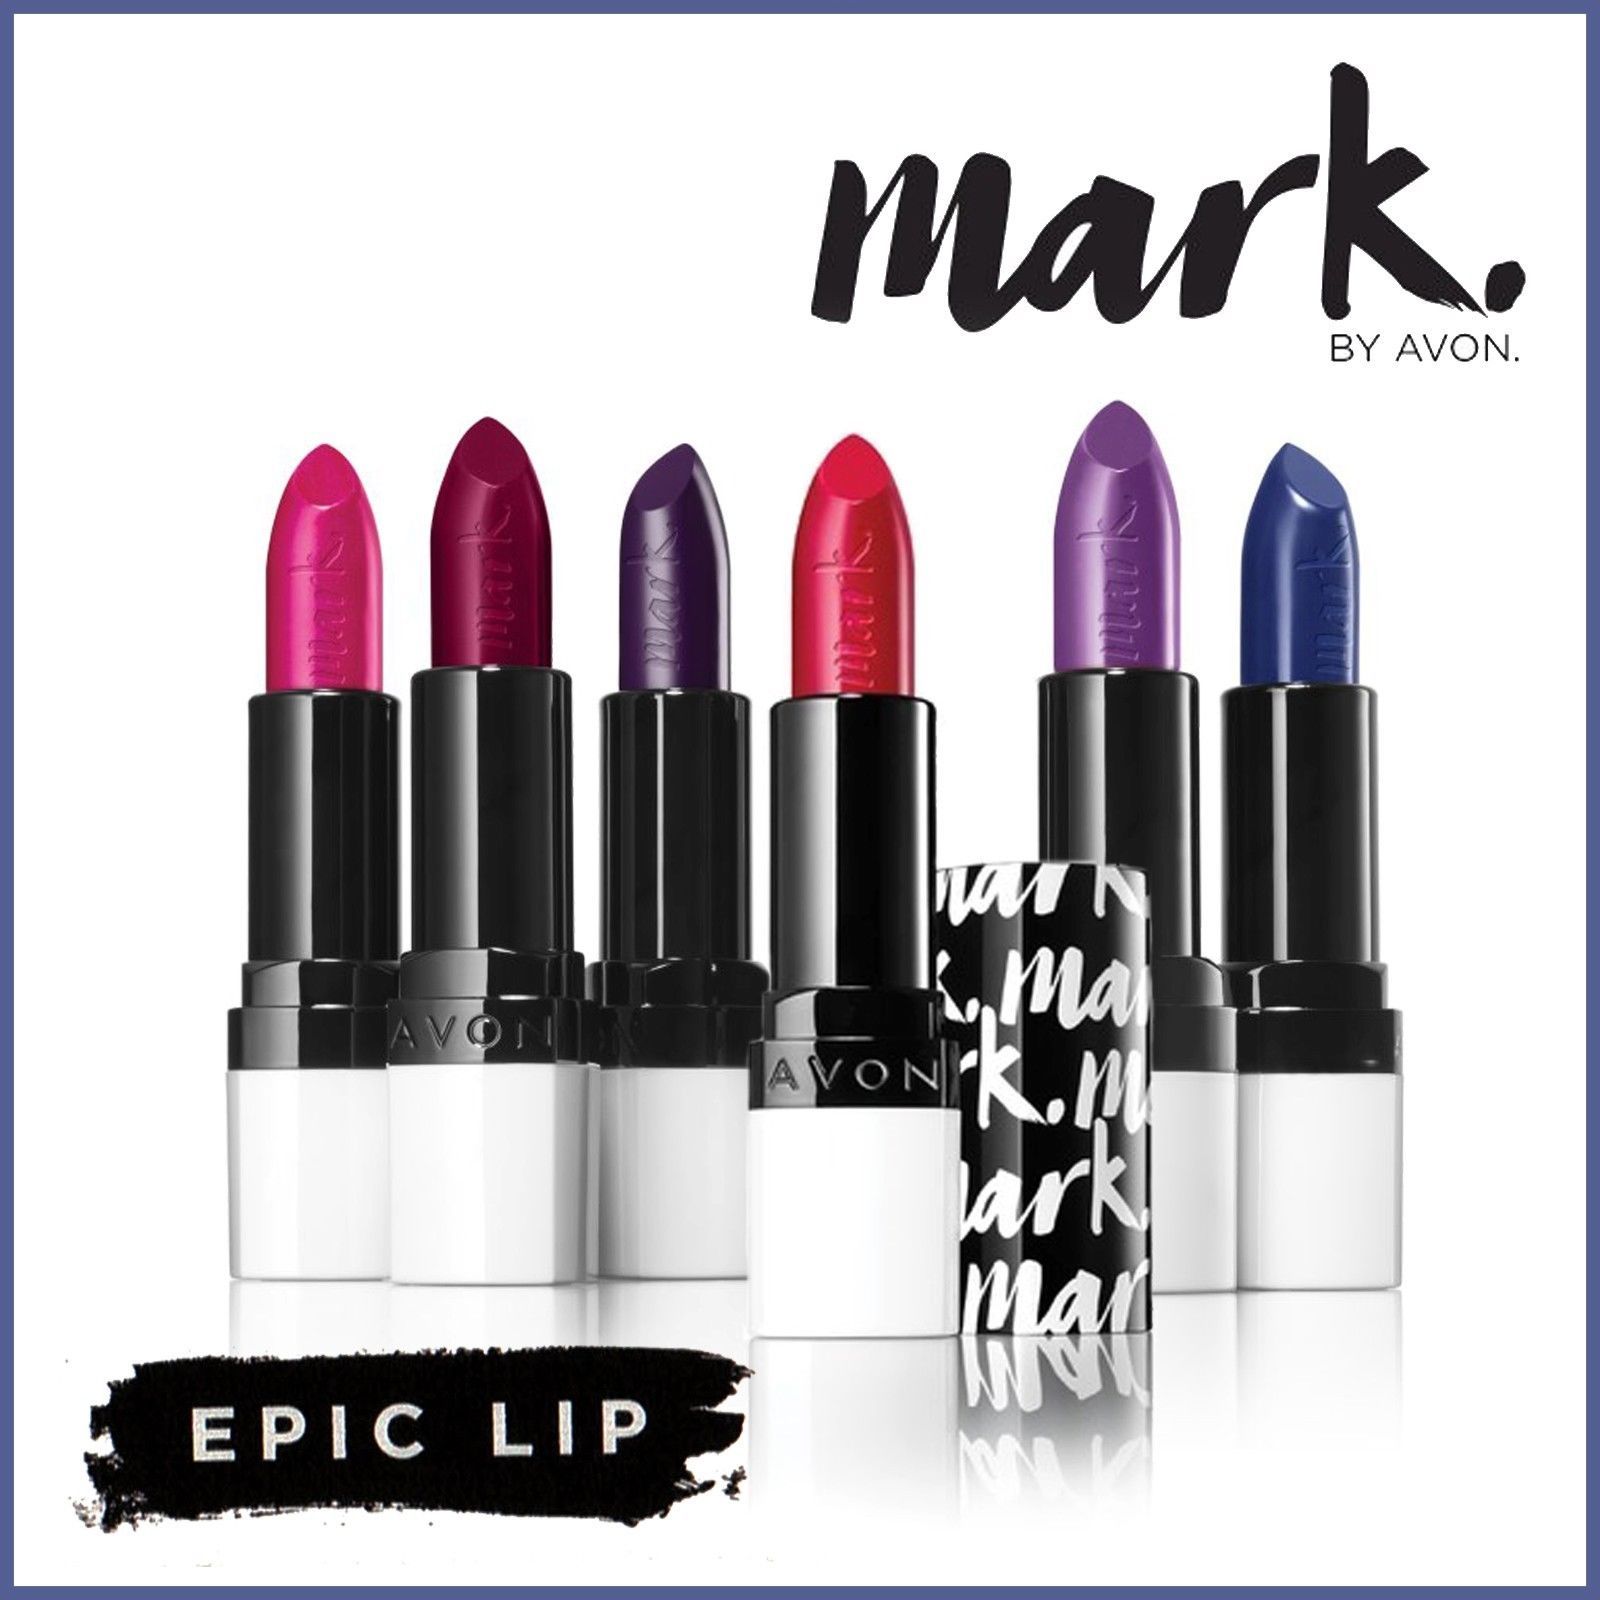 £4.49 GBP – Avon Mark Epic Lip Lipstick – Long Lasting With Built In Primer – All Shades #ebay #Fashion